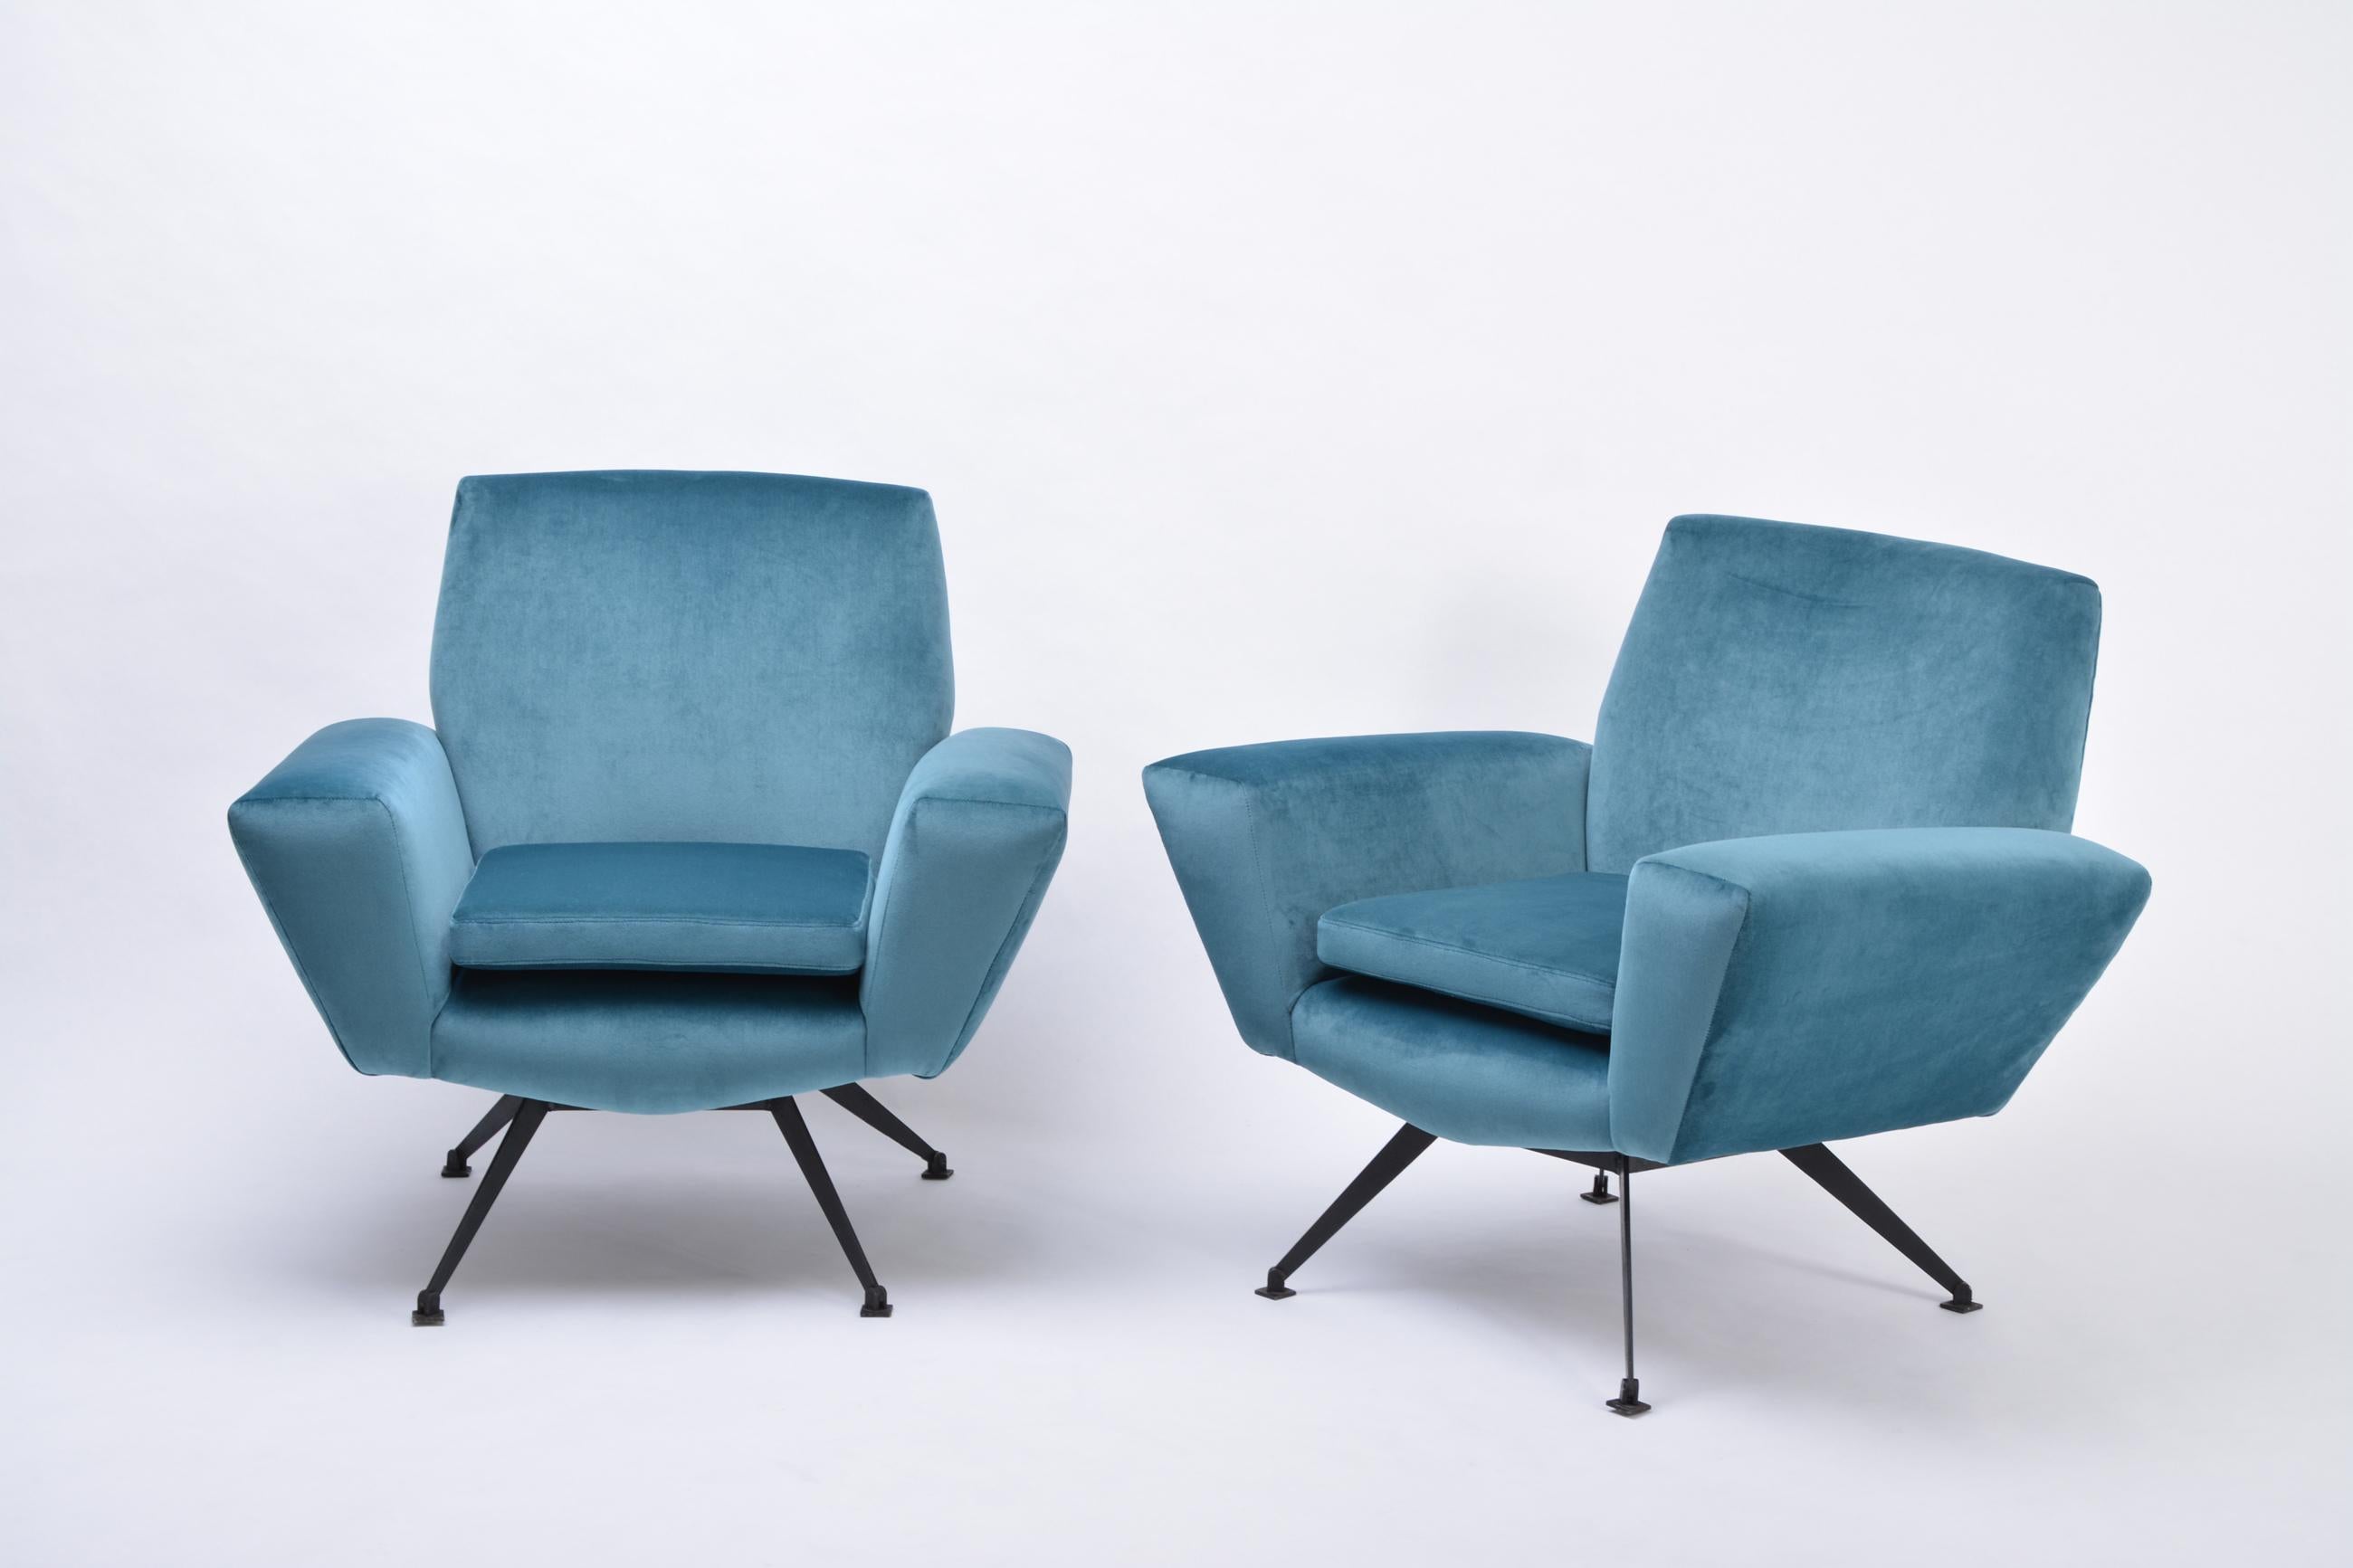 20th Century Set of Two Blue Reupholstered Italian Mid-Century Modern Lounge Chairs by Lenzi